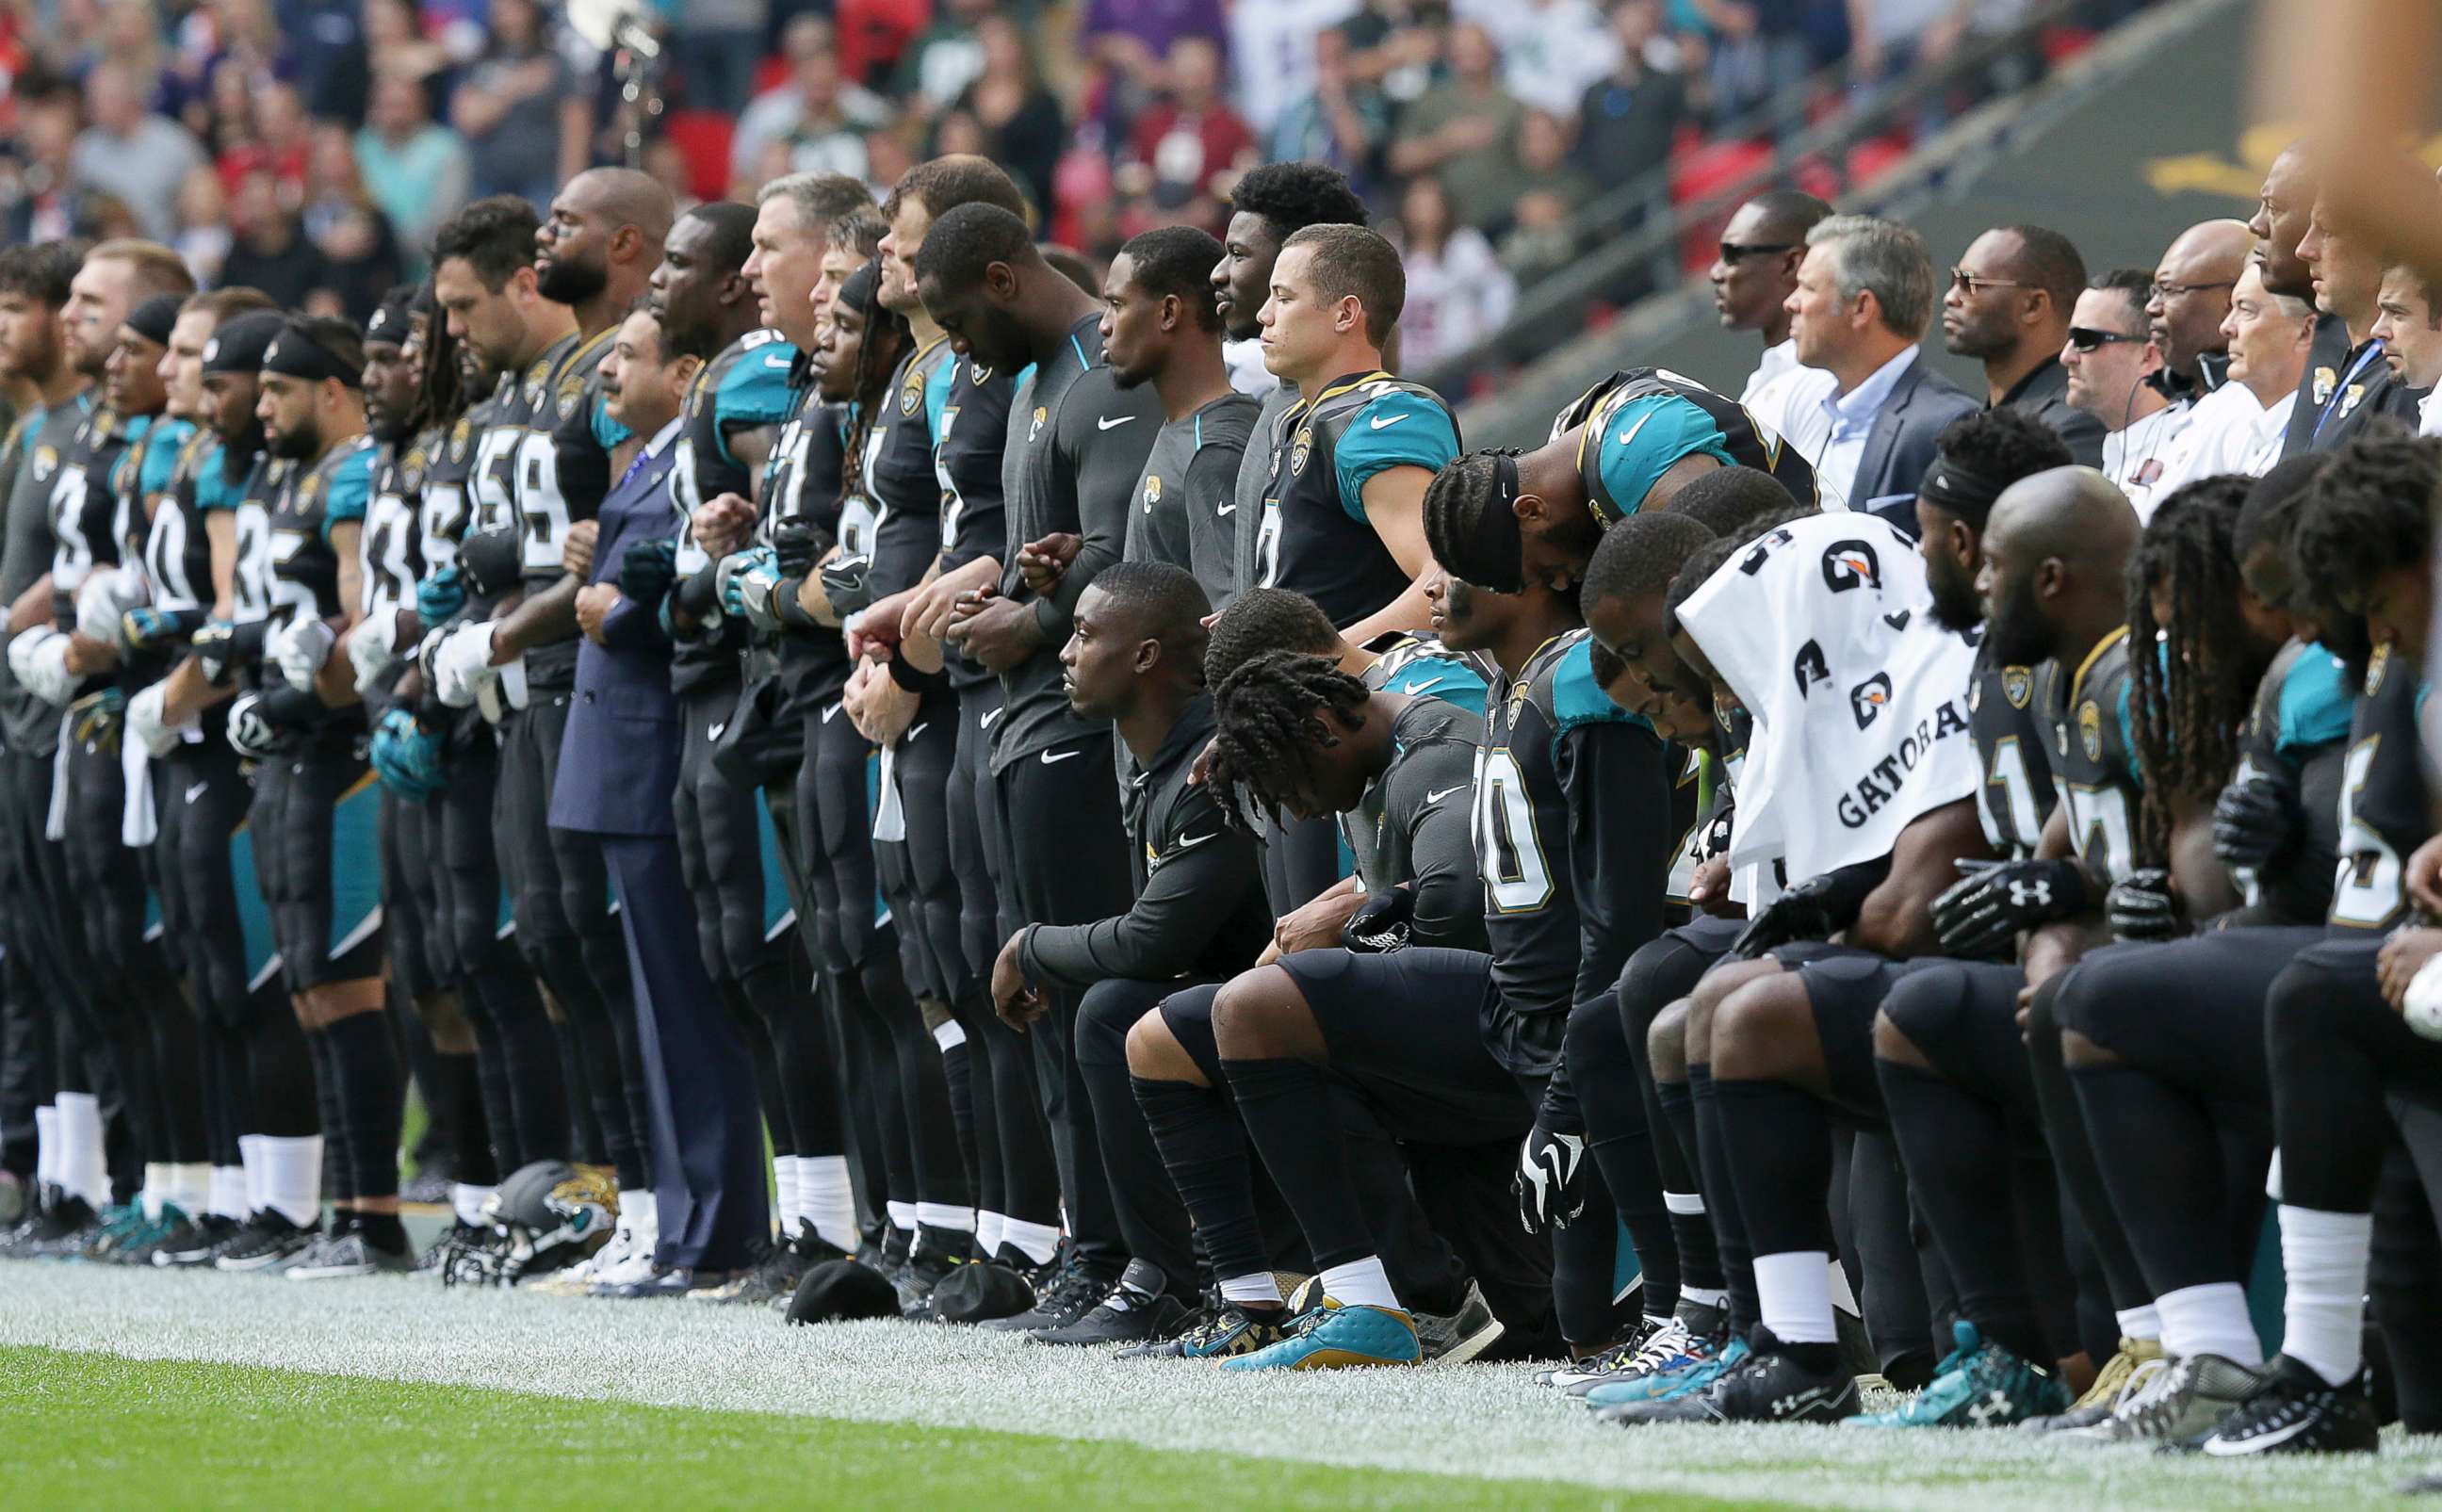 PHOTO: Jacksonville Jaguars NFL football players are shown, some standing and some kneeling, during the playing of the national anthem at Wembley Stadium in London.